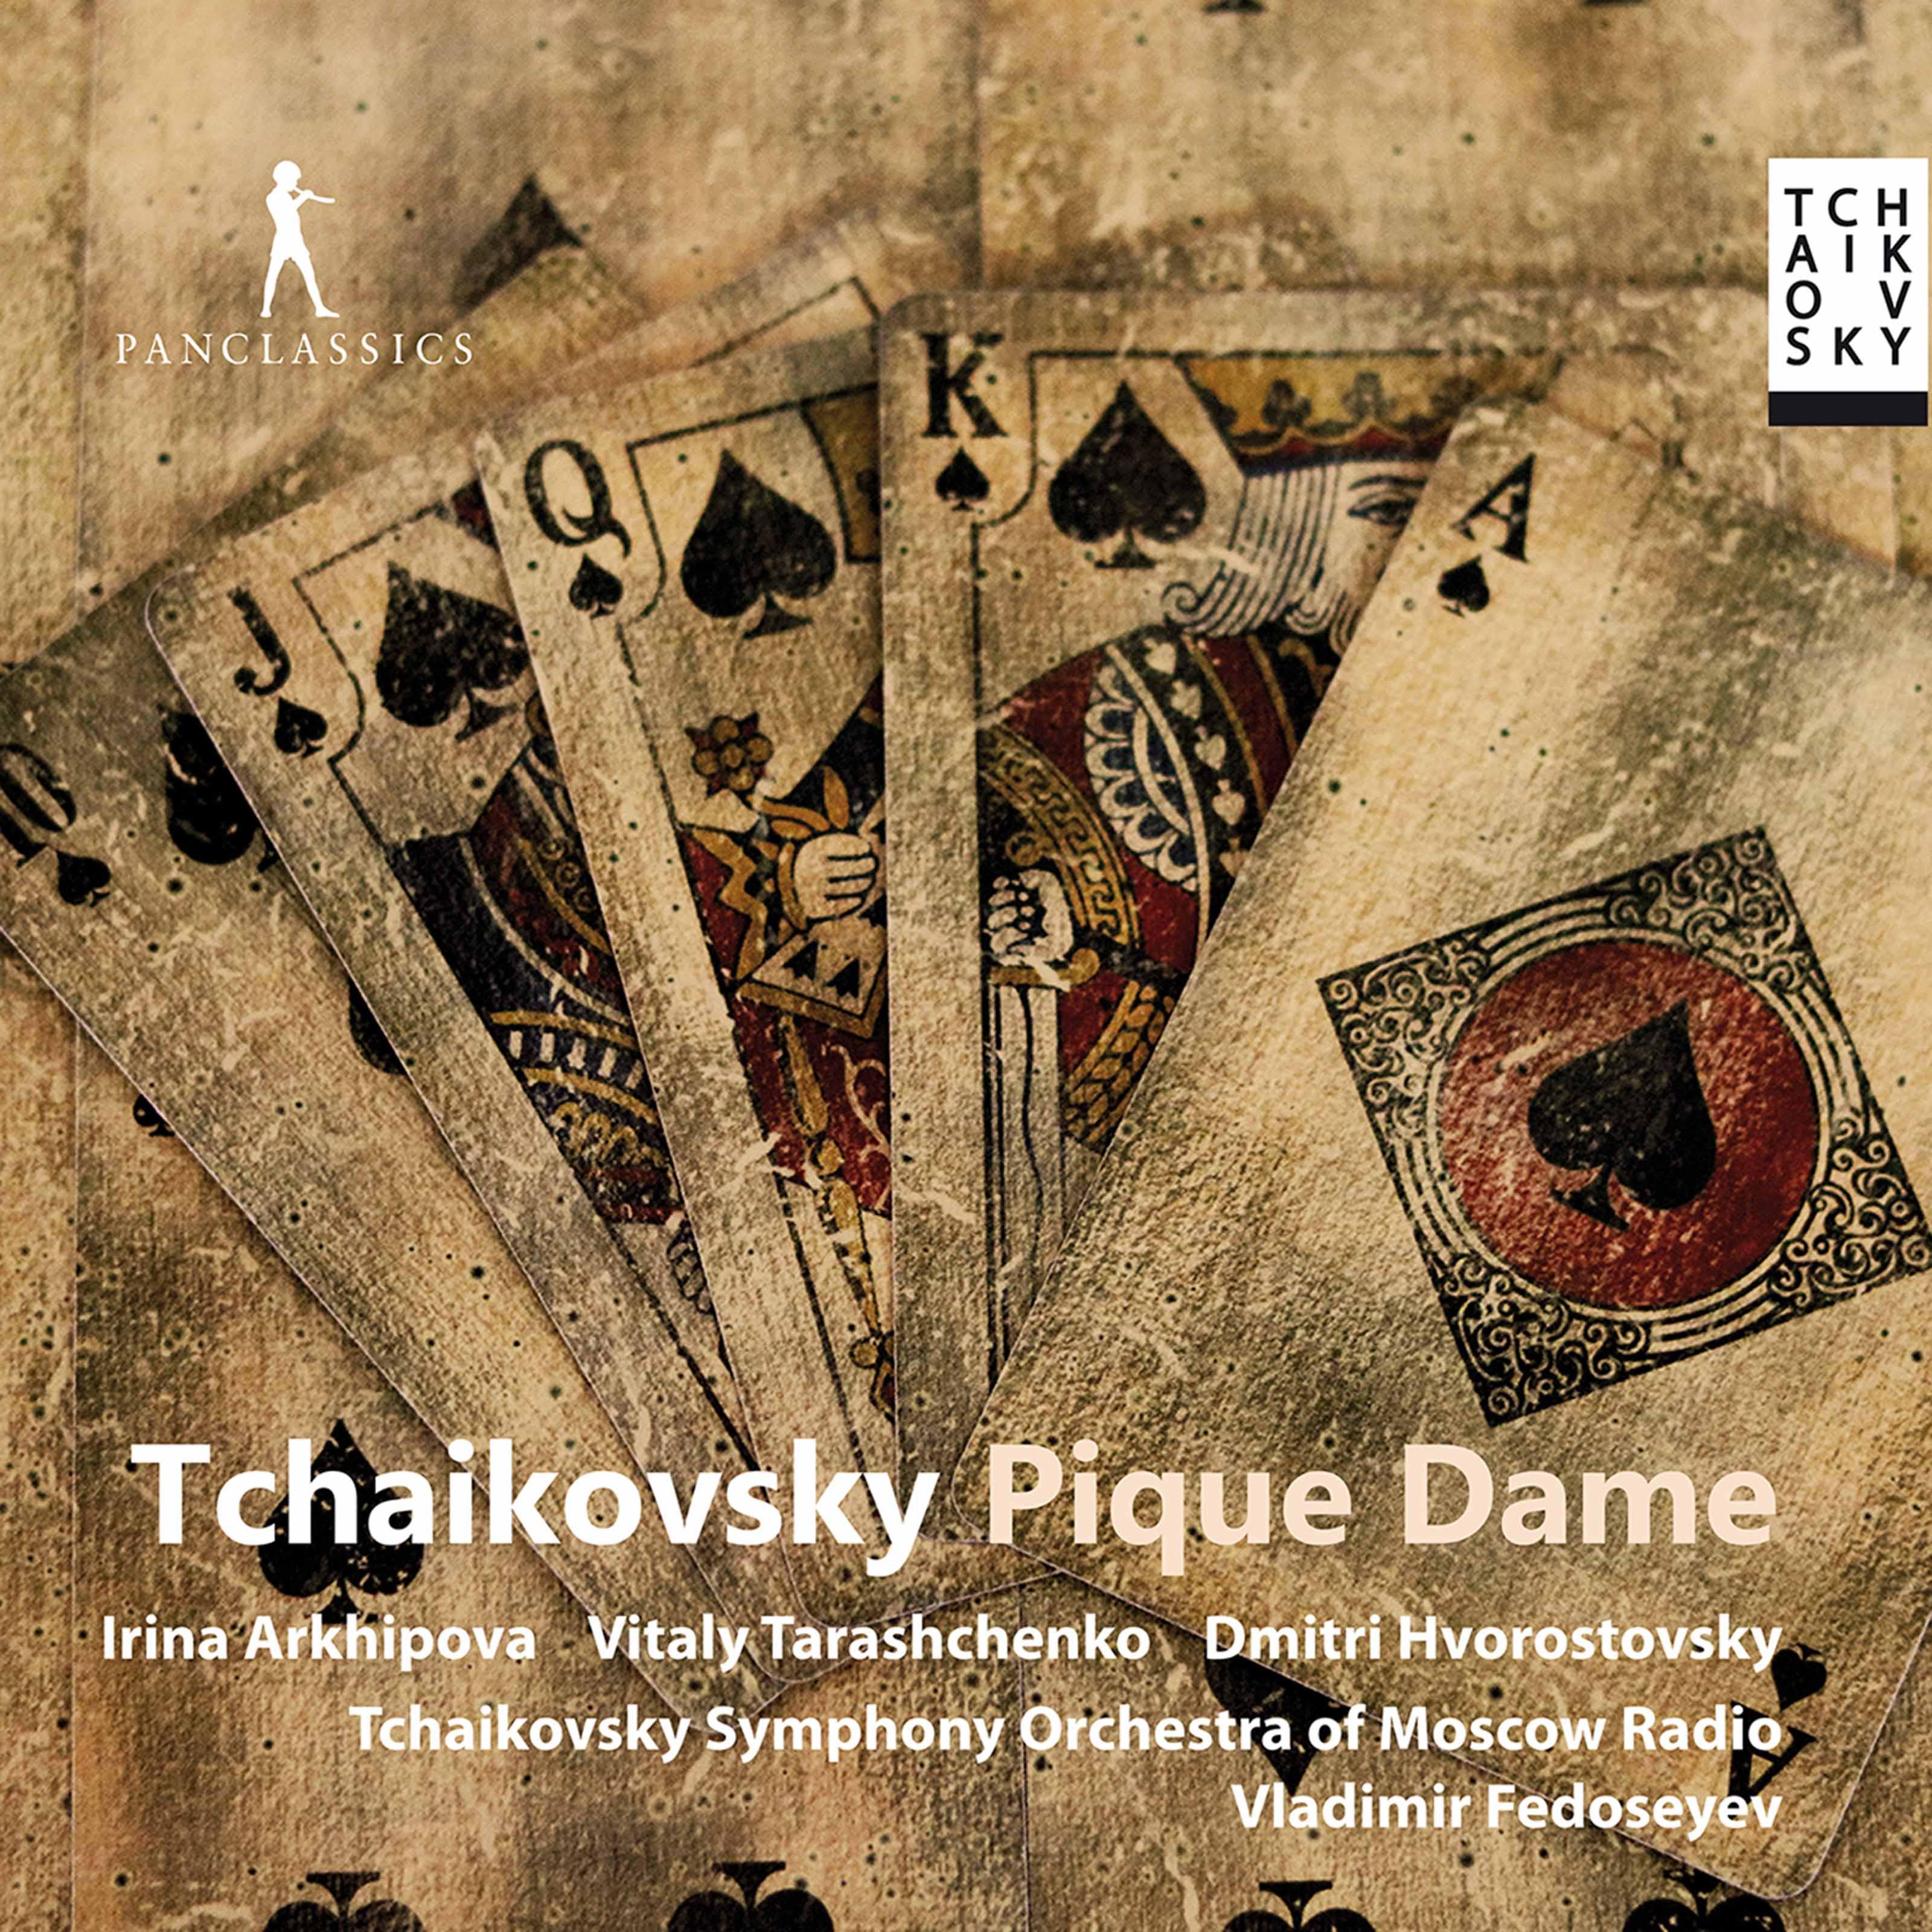 Tchaikovsky Symphony Orchestra - Pique dame, Op. 68, TH 10, Act III Scene 1: I'm Scared! (Live)